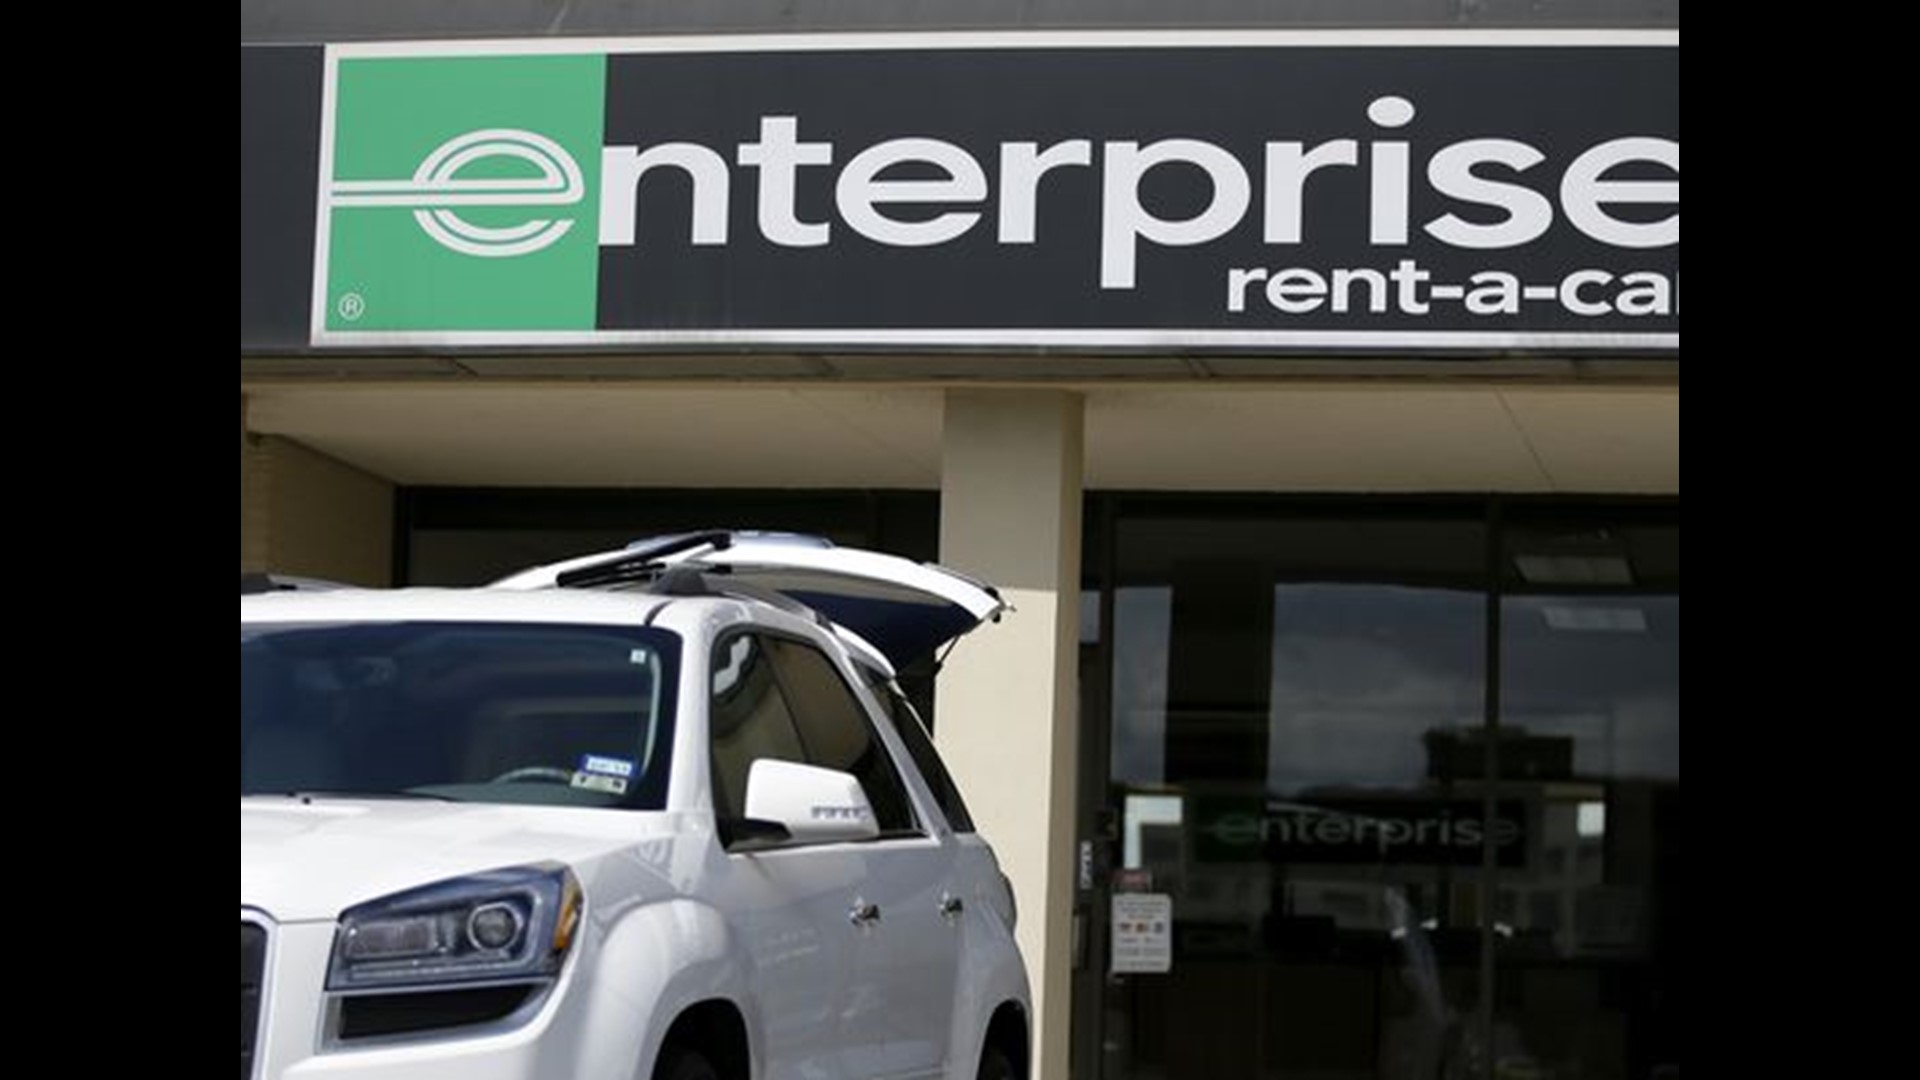 Carmakers could lose 12% of business this year because of a decline in car rentals. Also, Google is facing a new privacy lawsuit. | Business Headlines